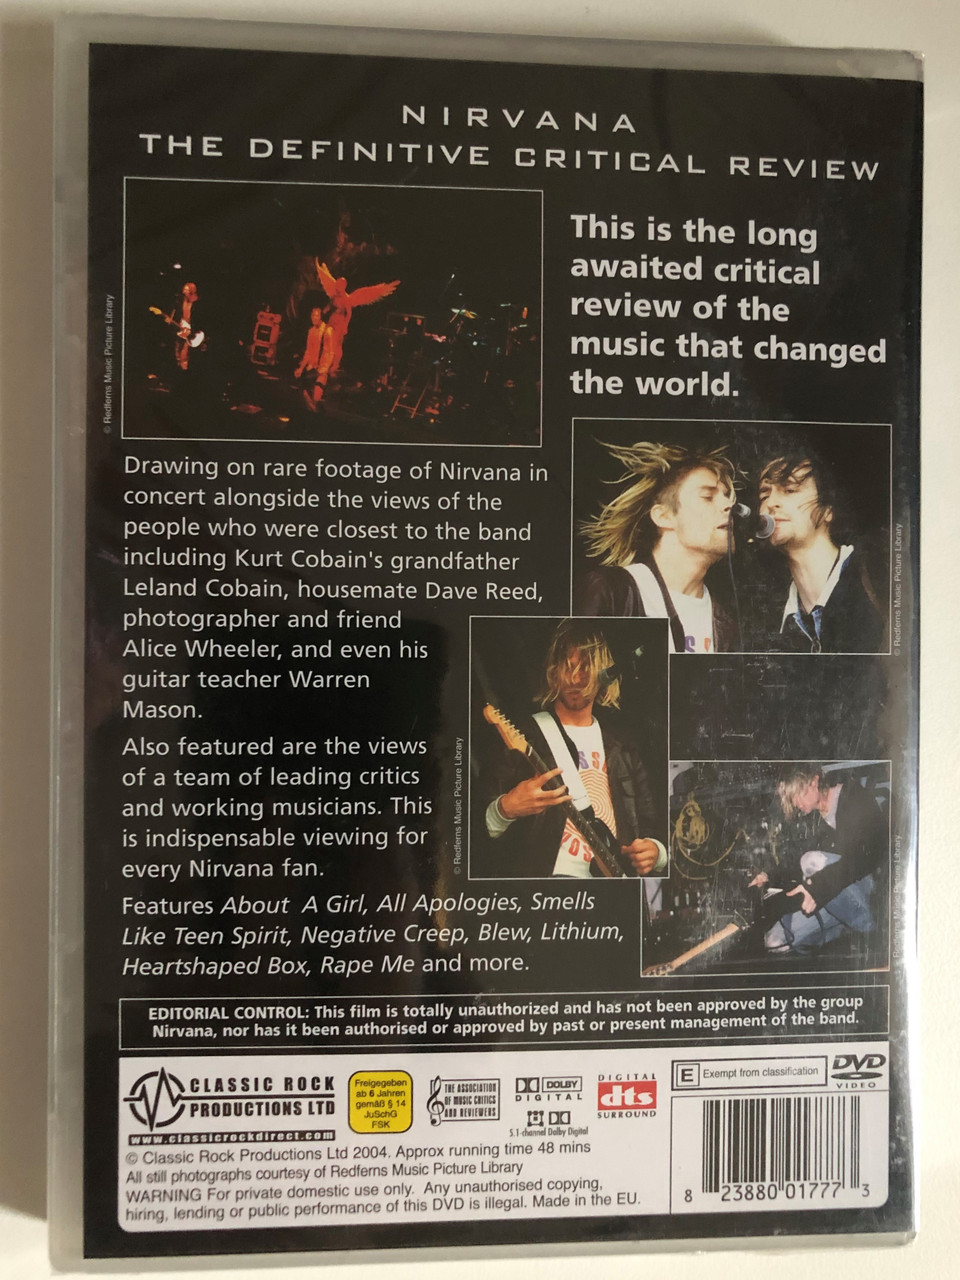 https://cdn10.bigcommerce.com/s-62bdpkt7pb/products/0/images/271595/Inside_Nirvana_An_Independent_Critical_Review_-_Featuring_Live_Archive_Footage_Previously_Unavailable_On_DVD_Classic_Rock_Productions_DVD_Video_CD_2004_CRP_1777_PAL_3__79876.1680273787.1280.1280.JPG?c=2&_gl=1*w9j13f*_ga*MjA2NTIxMjE2MC4xNTkwNTEyNTMy*_ga_WS2VZYPC6G*MTY4MDI3MDcyNS44MjguMS4xNjgwMjczNTc5LjMyLjAuMA..